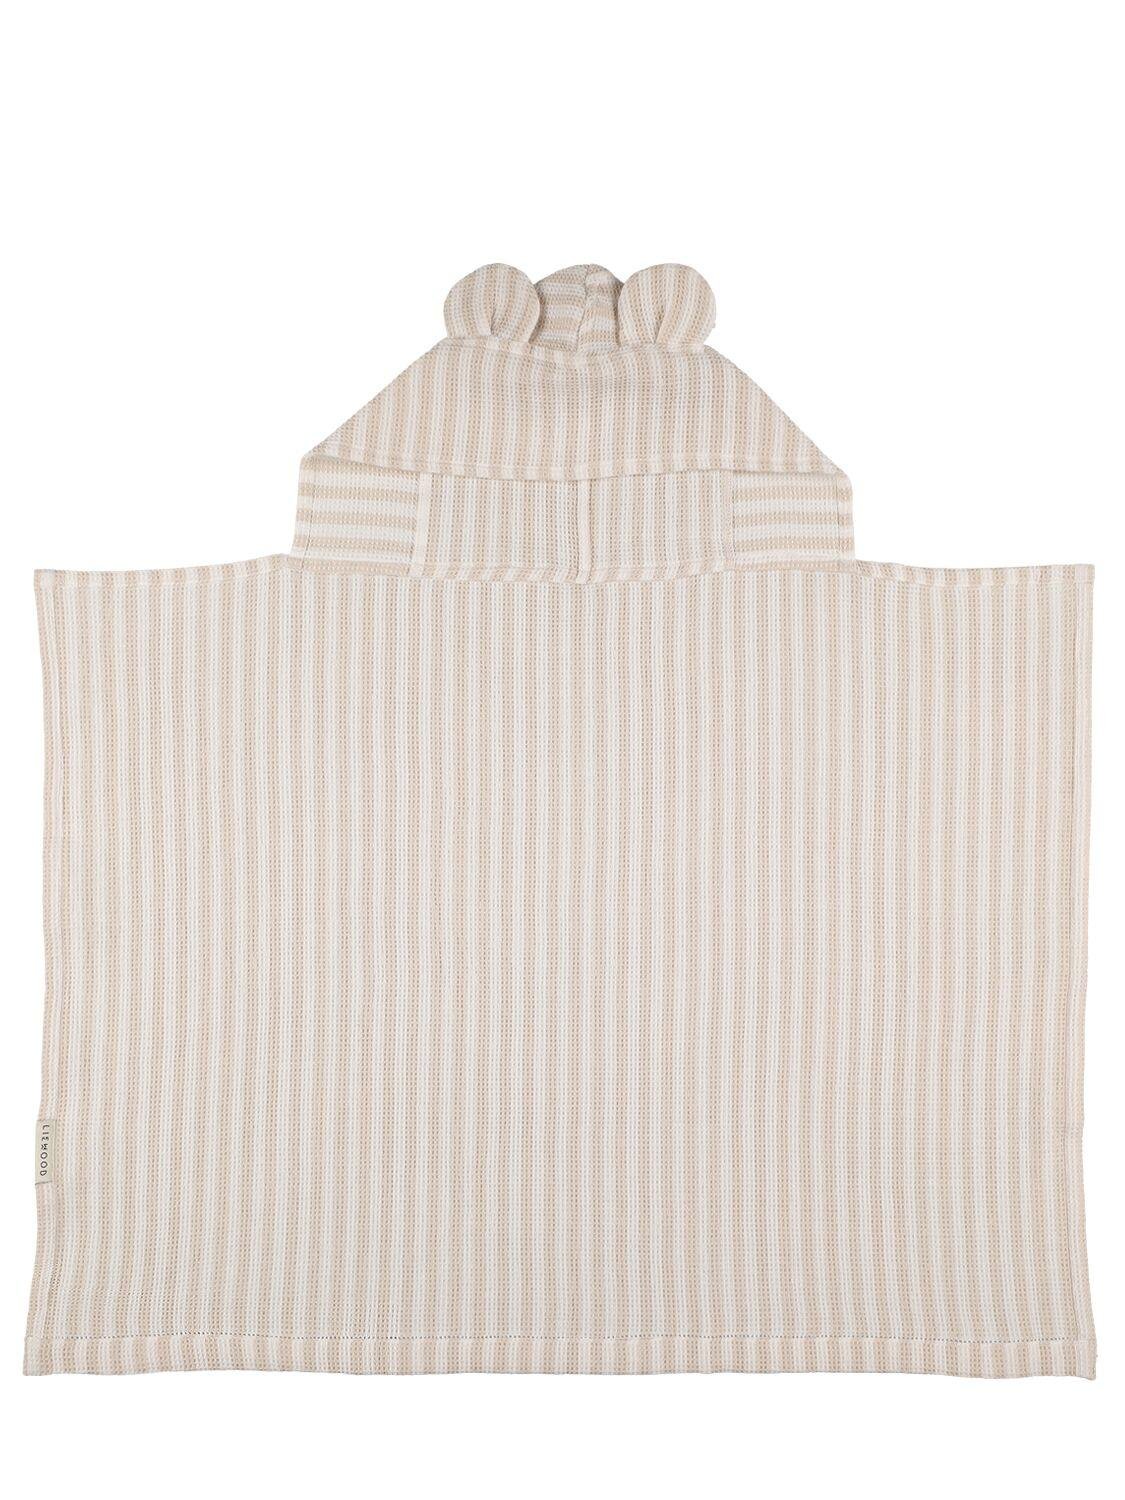 Organic Cotton Hooded Towel by LIEWOOD